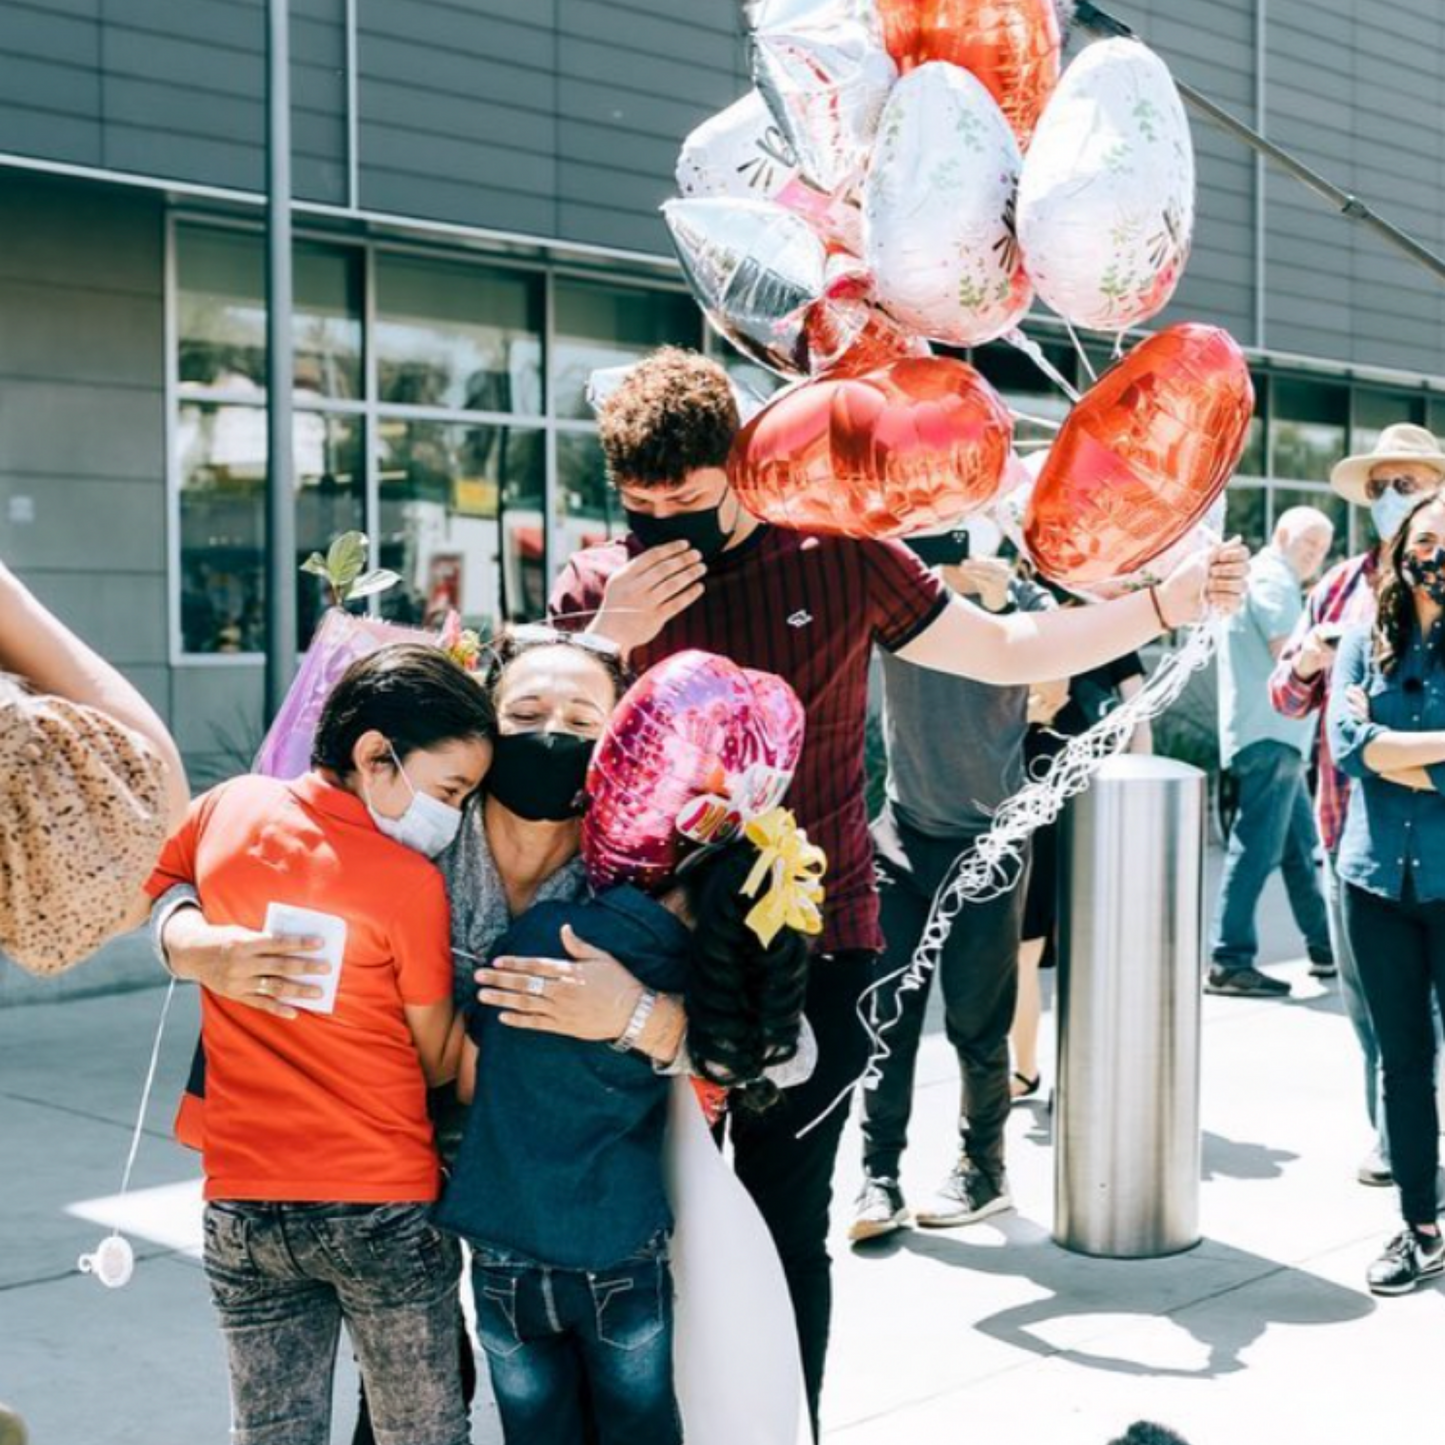 Mother reuniting with her 2 young children, and a man holding balloons behind.